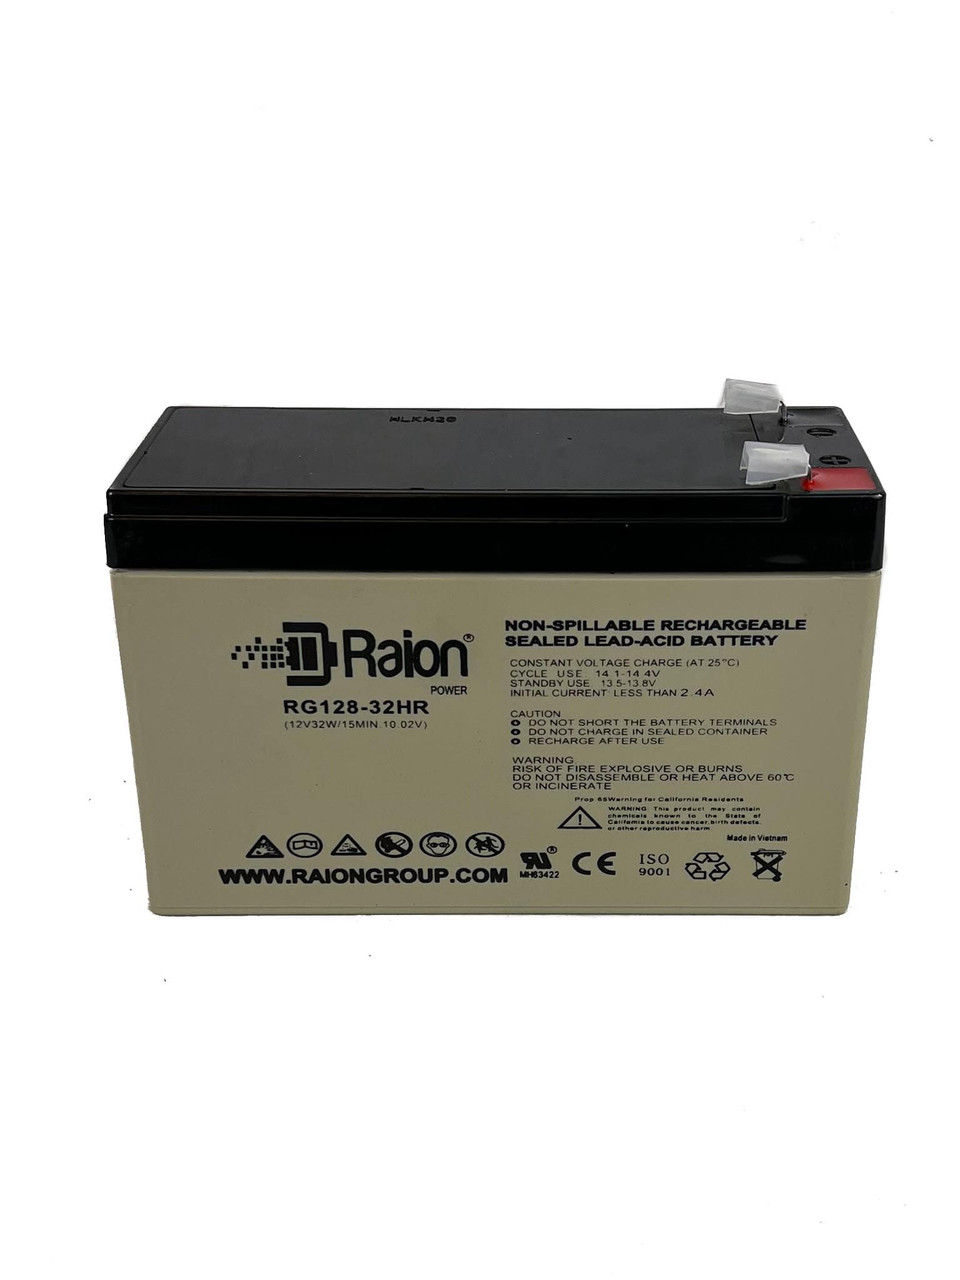 Raion Power RG128-32HR Replacement High Rate Battery Cartridge for APC Back-UPS 500VA INDUSTRIAL DIN RAIL UPS 120V SP500DR